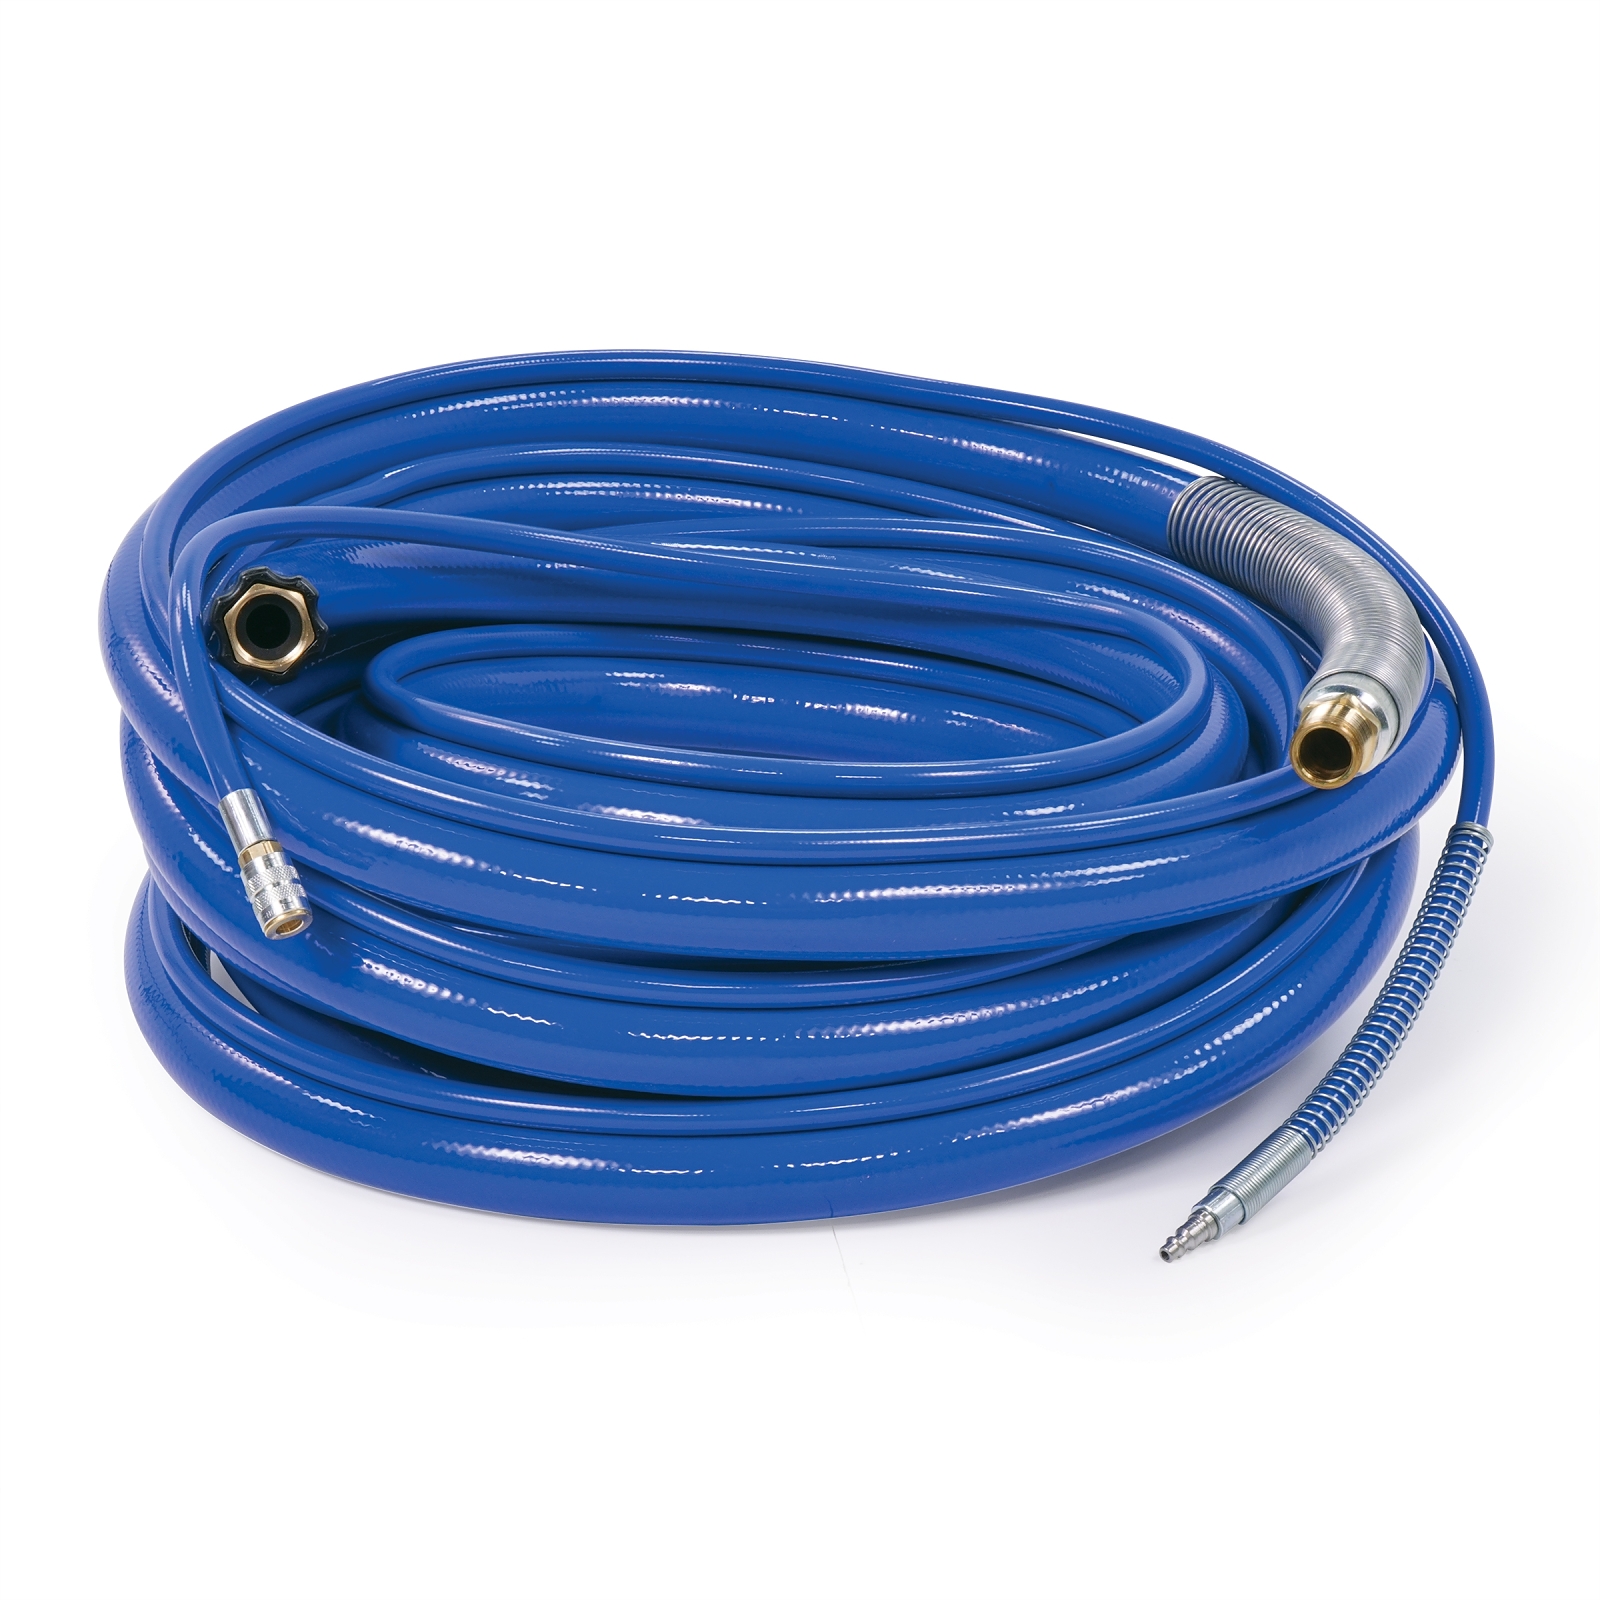 Blue Solid Heavy-Duty Texture Hose Kit, 1 1/4 in x 50 ft